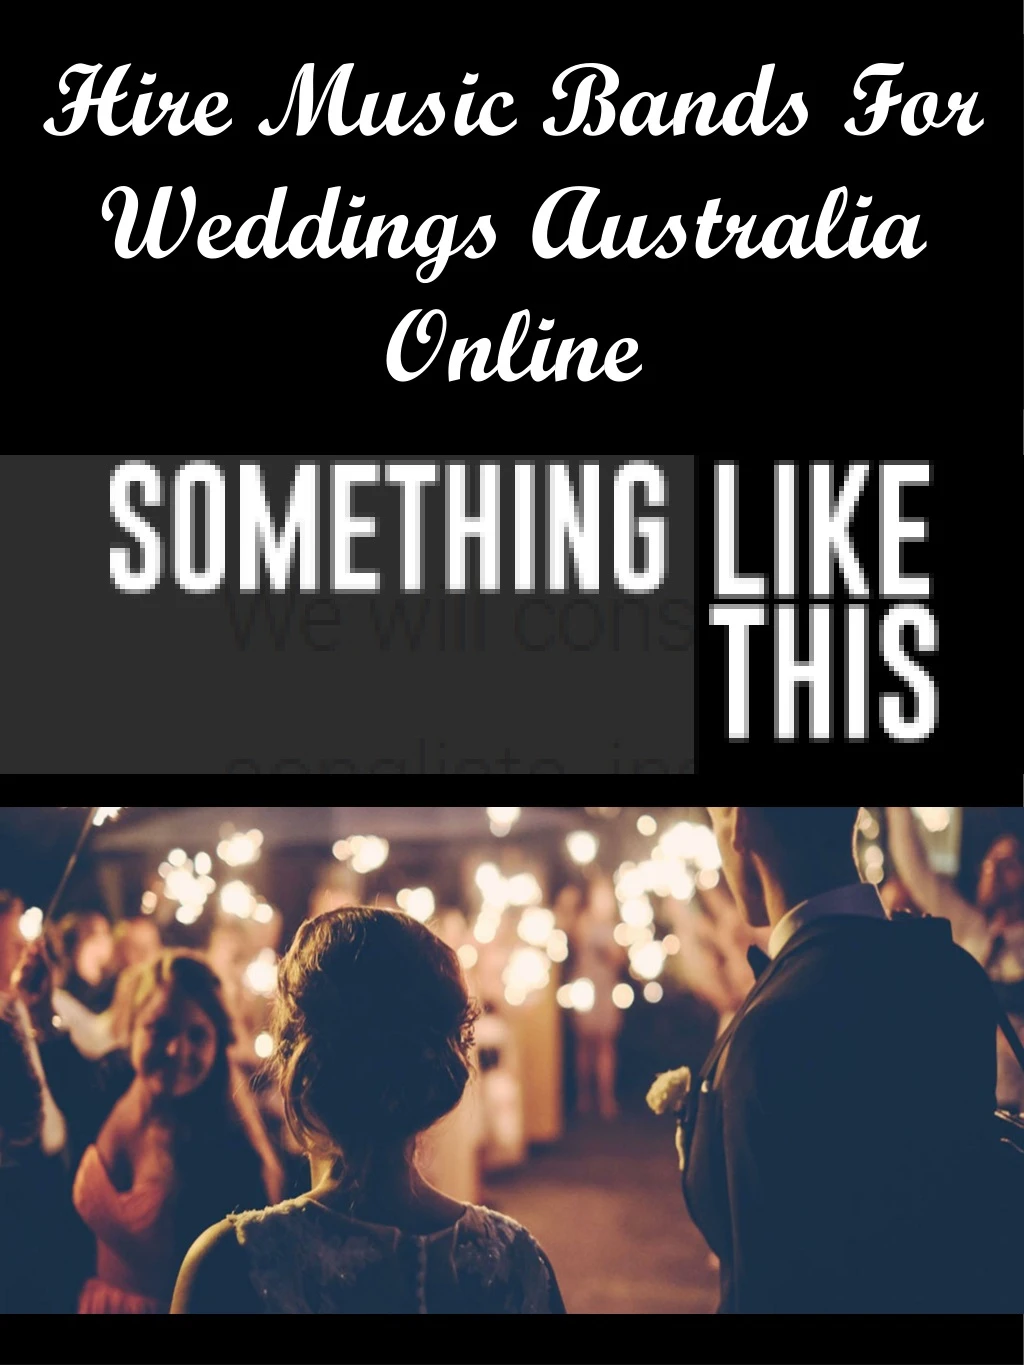 hire music bands for weddings australia online